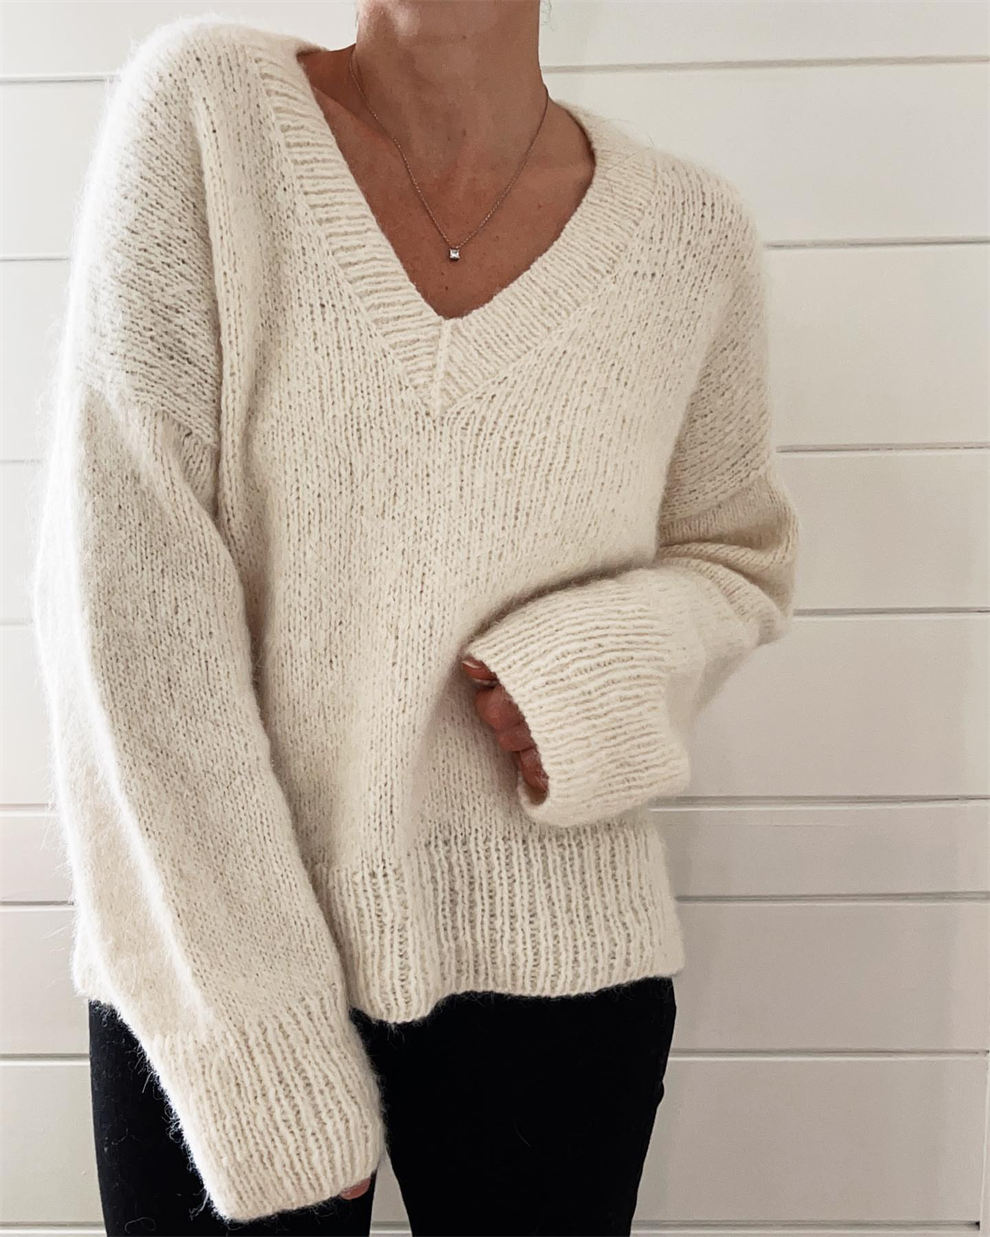 V neck Sweater Outfits for Women13